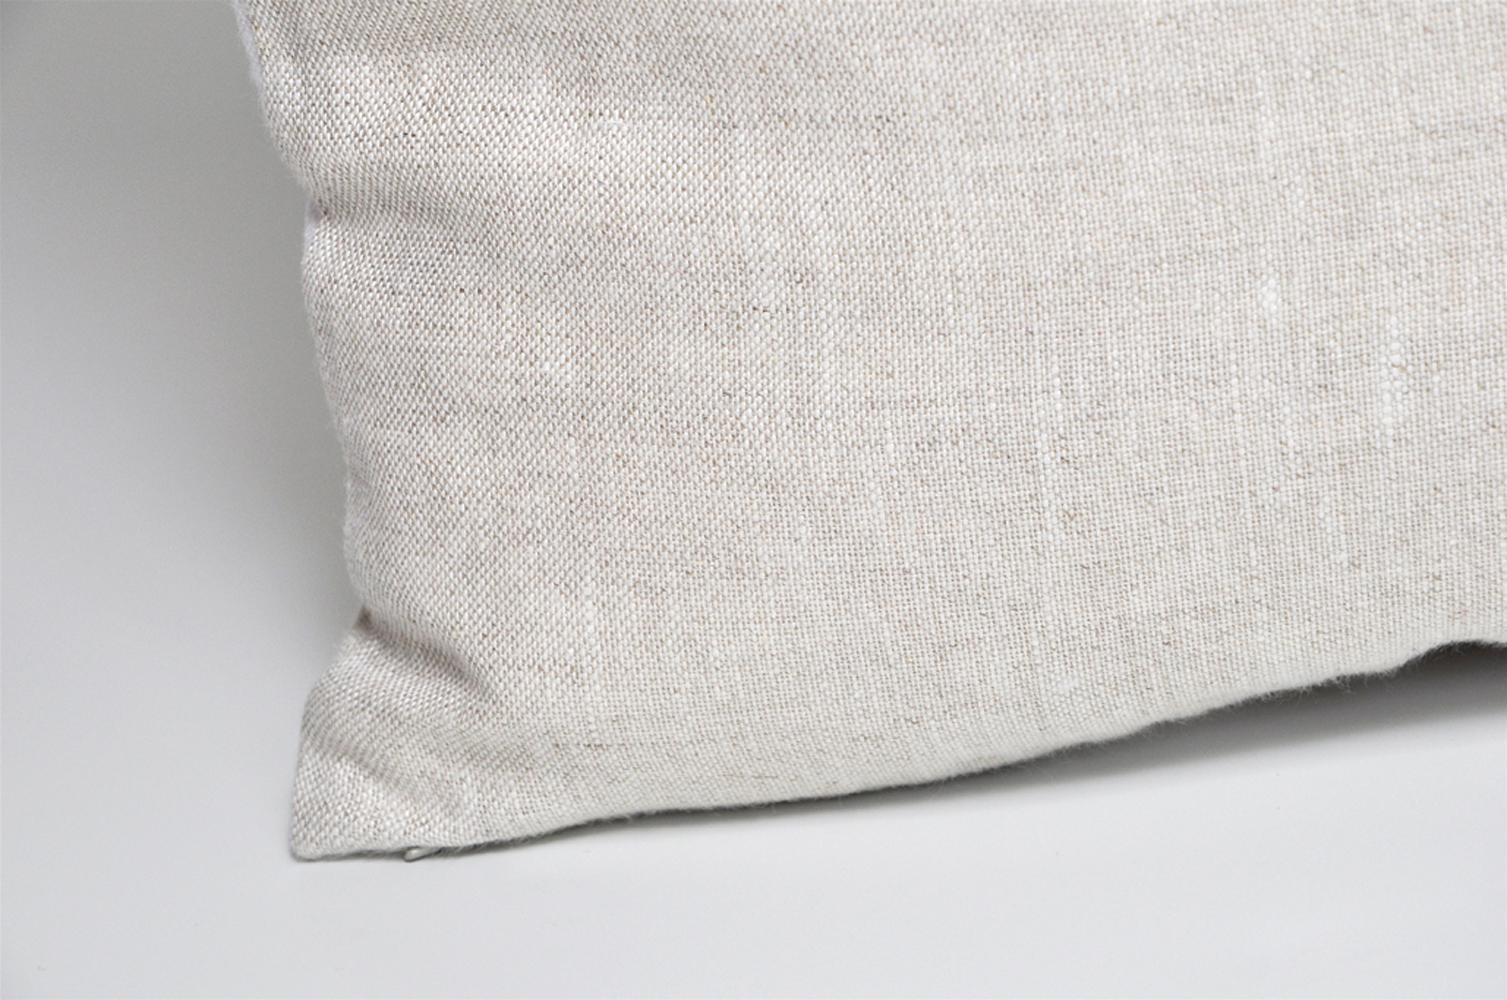 Northern Irish Small Designer Bow Pillow in Vintage Irish Linen Natural Oatmeal Cushion For Sale